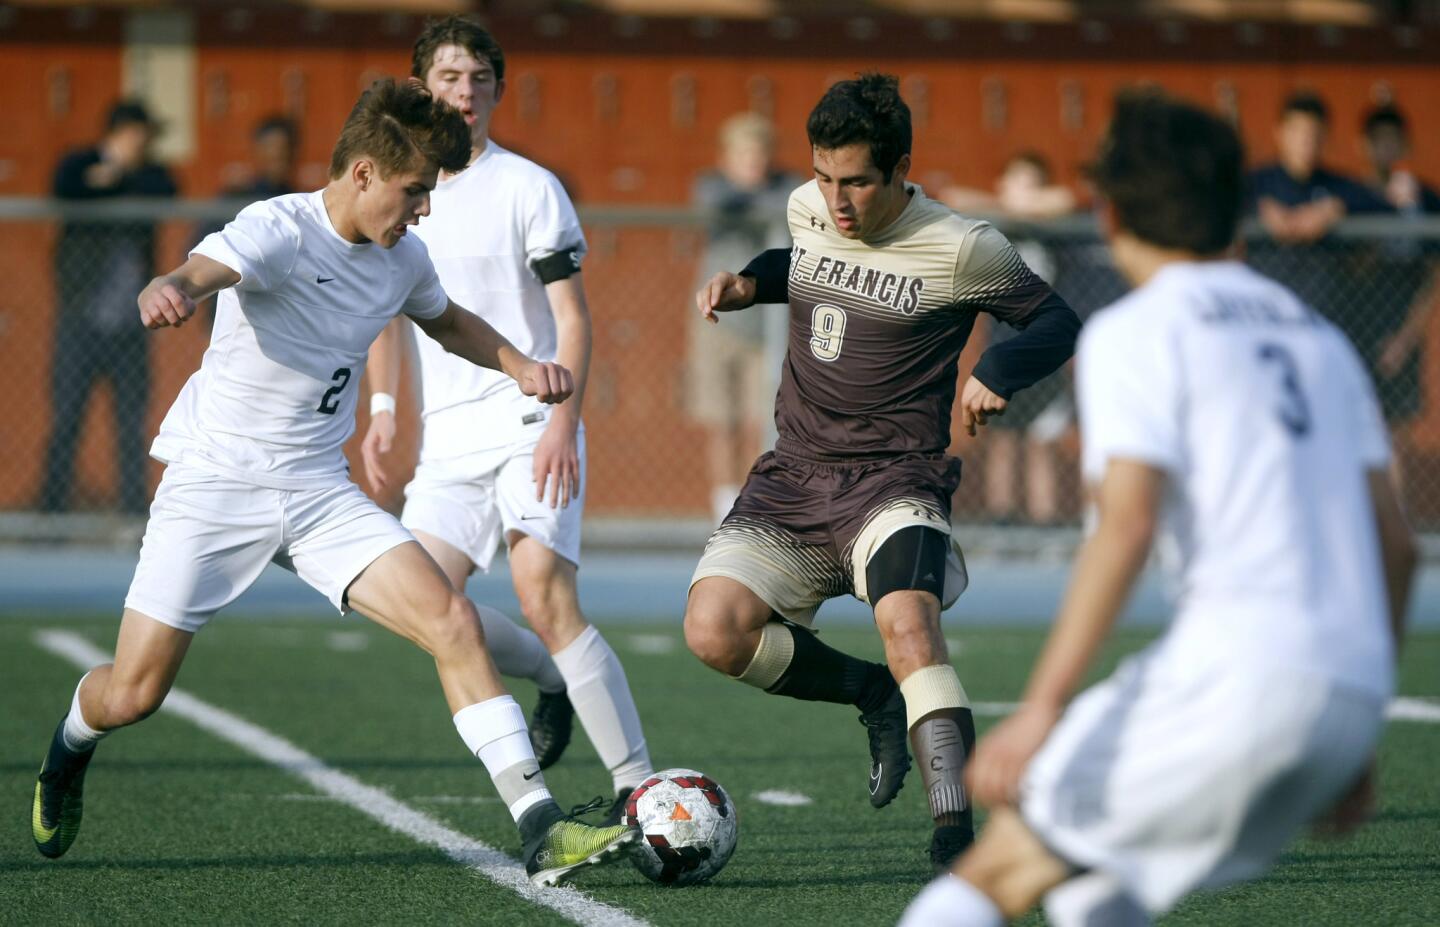 St. Francis High School soccer player #9 Colton Ramirez is overwhelemed by the defense in away game vs. Loyola High School at the Cub's field in Los Angeles on Friday, Jan. 13, 2017. The Golden Knights of St. Francis lost 0-2.